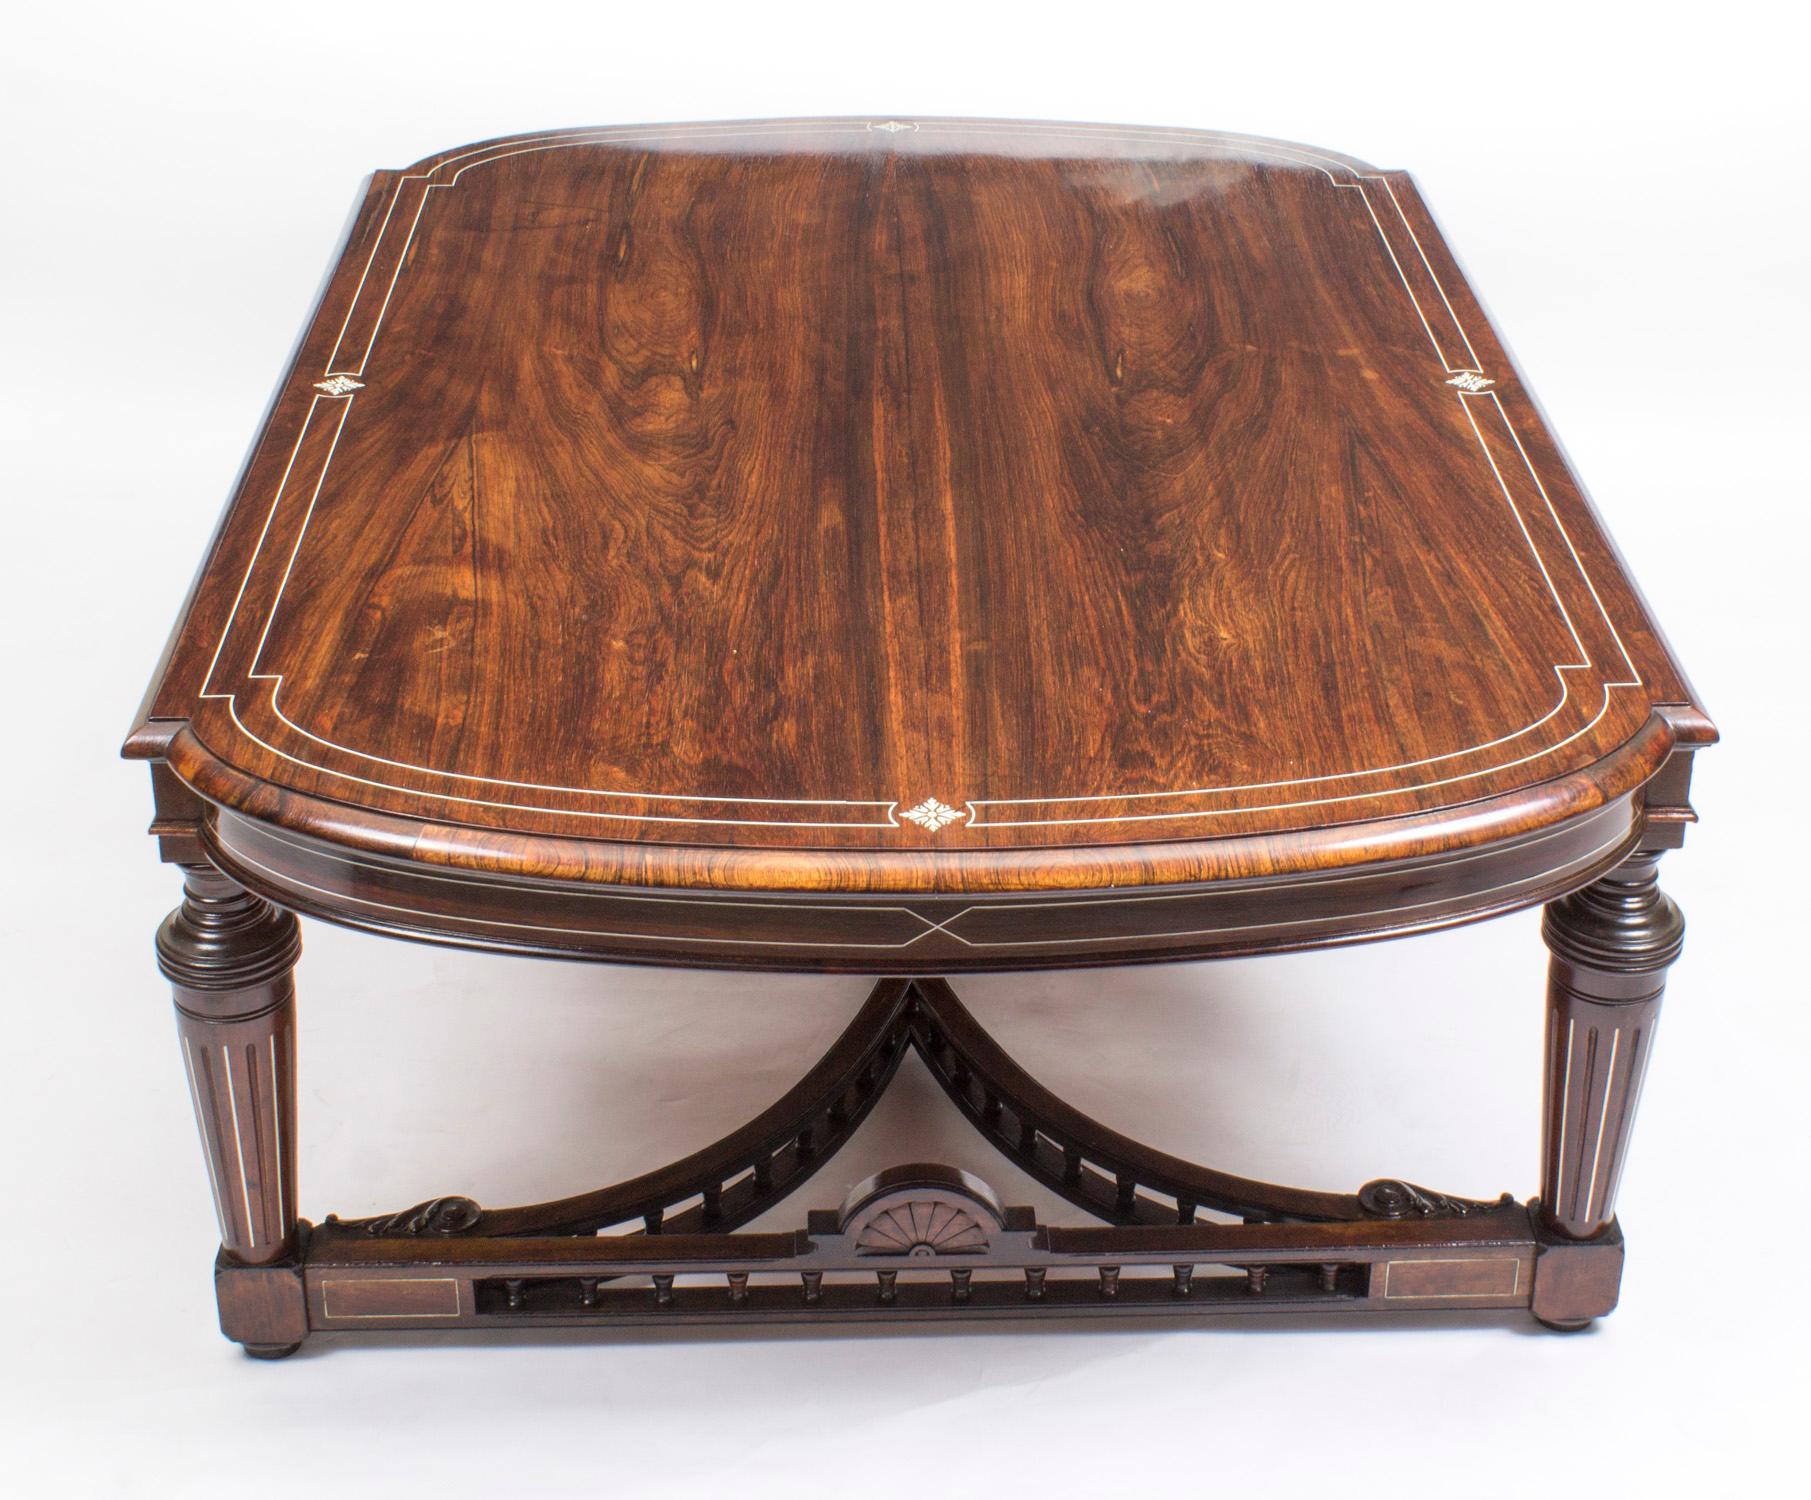 Wood Antique Inlaid Gonçalo Alves Inlaid Coffee Table, 19th Century